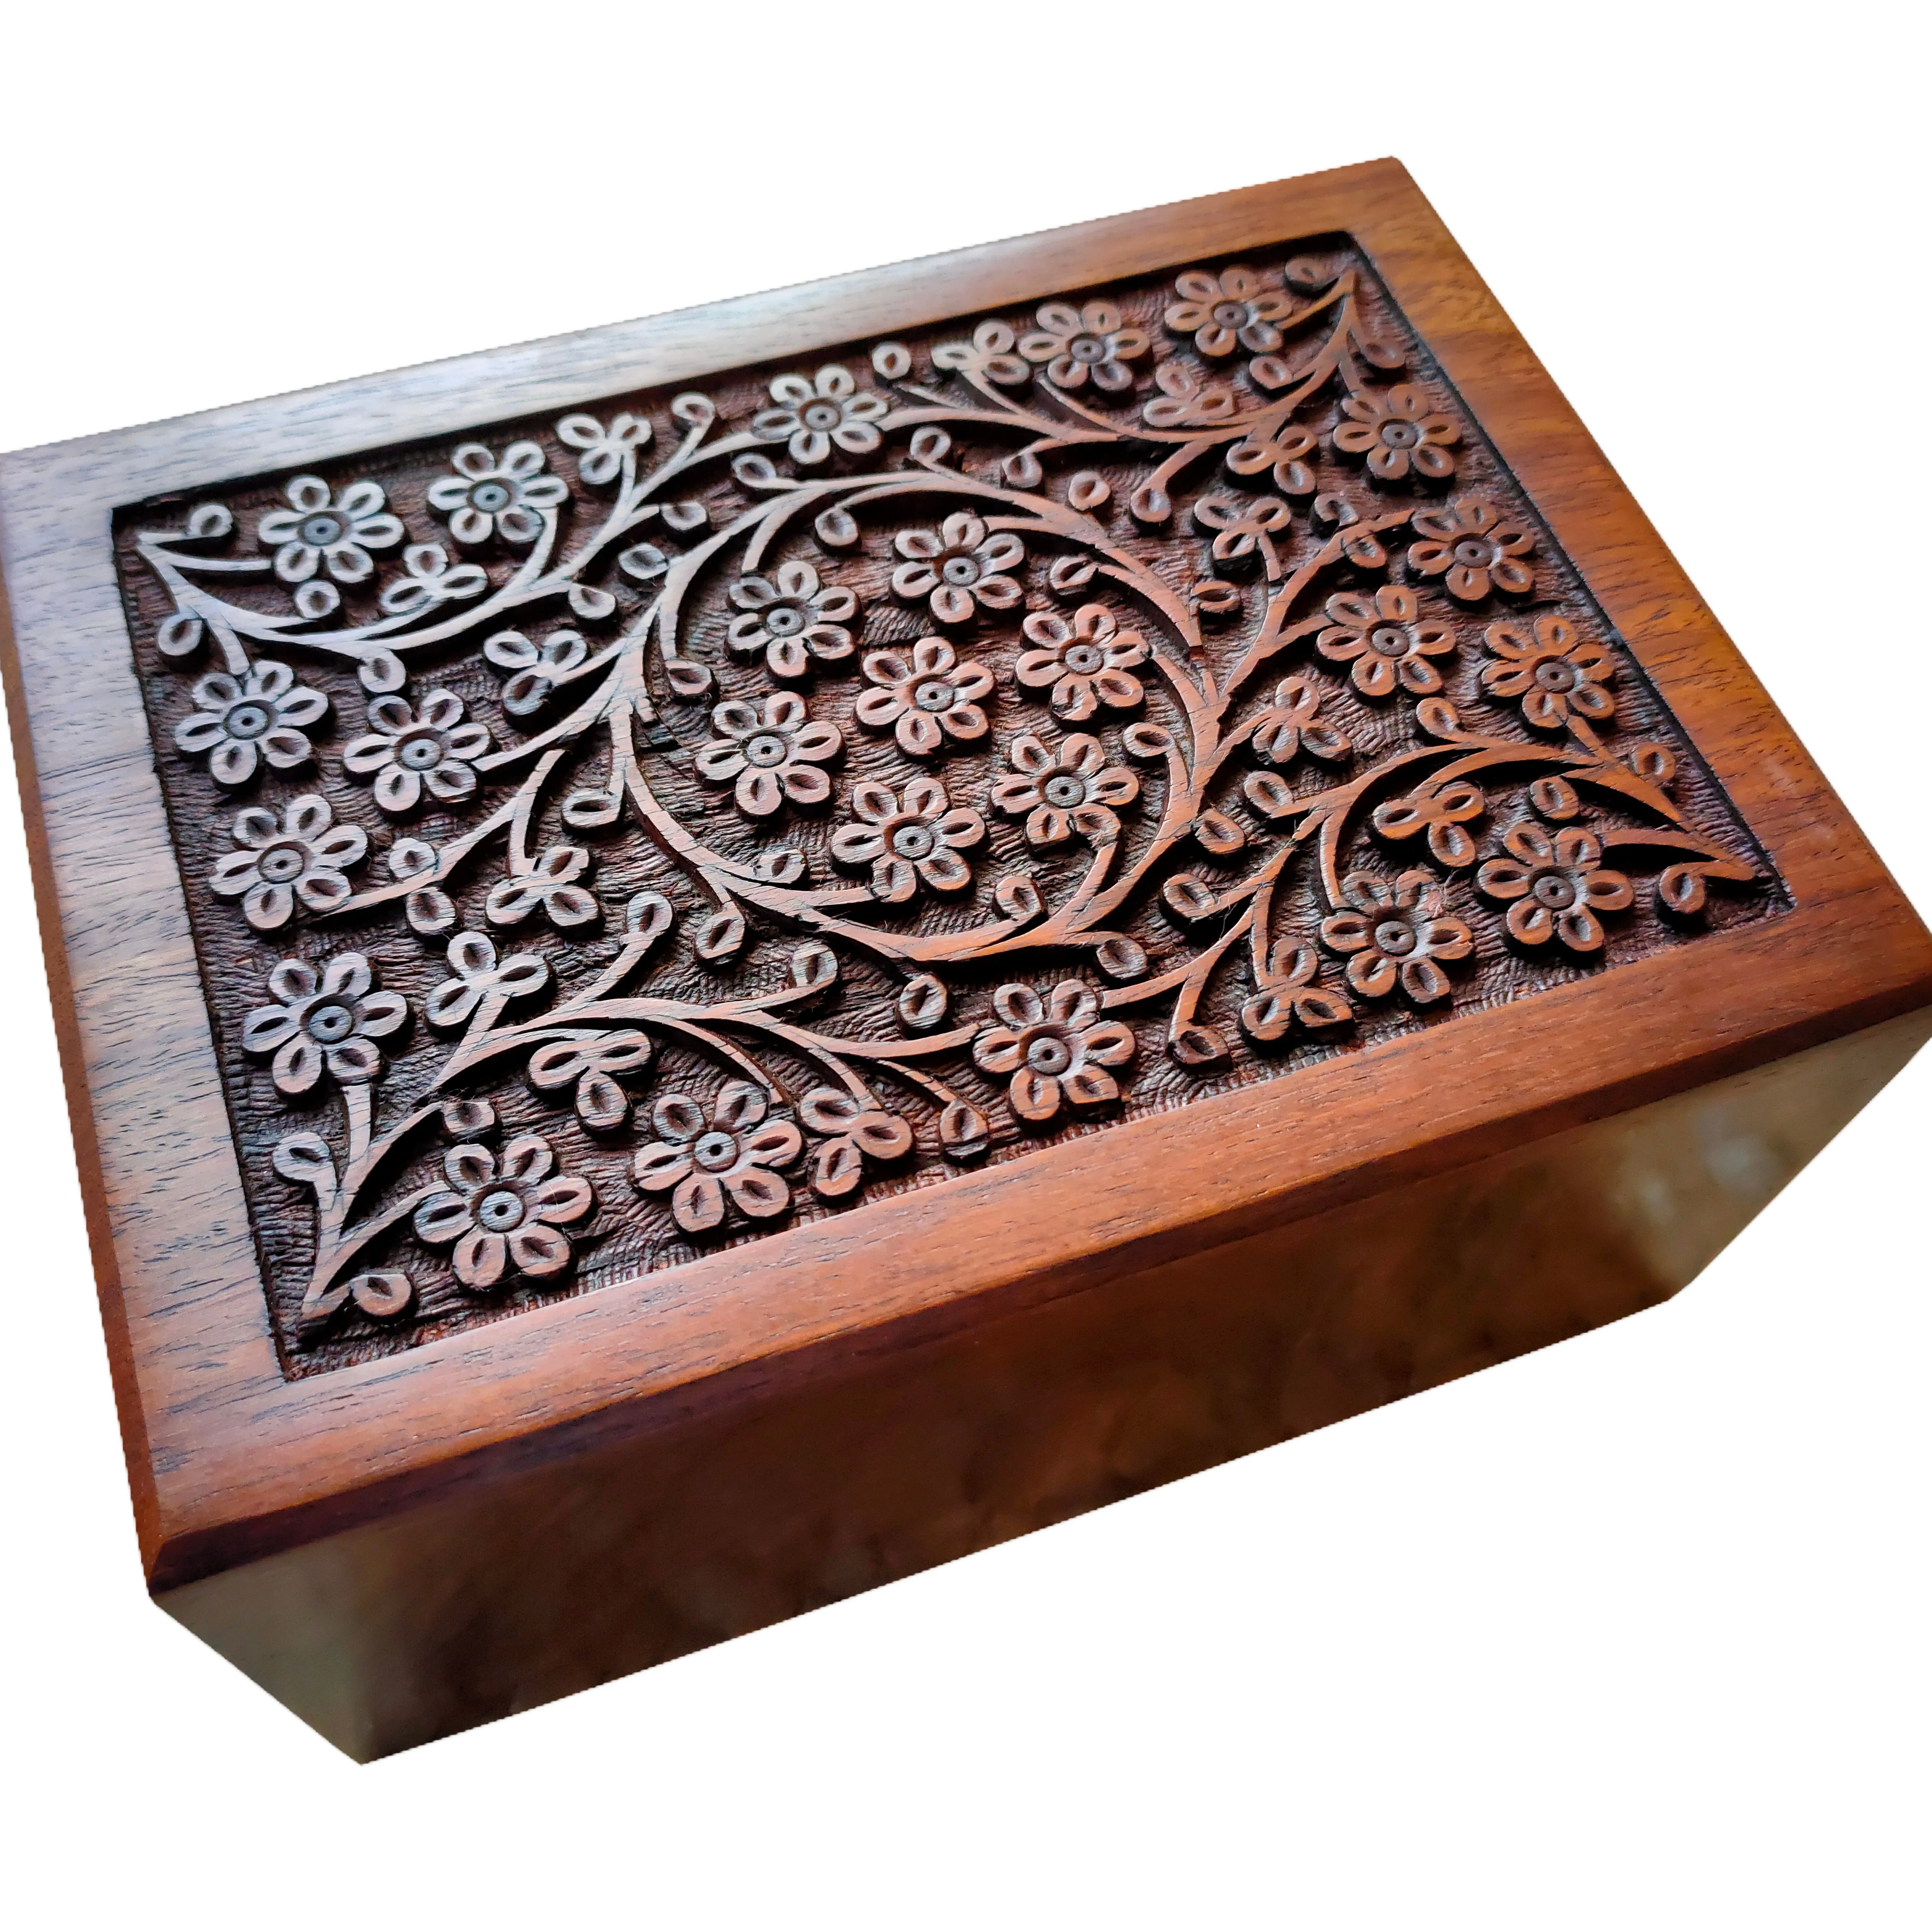 Hand-Carved Wooden Christmas Decoration Cremation Urns: Crafted for Human and Pet Ashes from Indian Rosewood